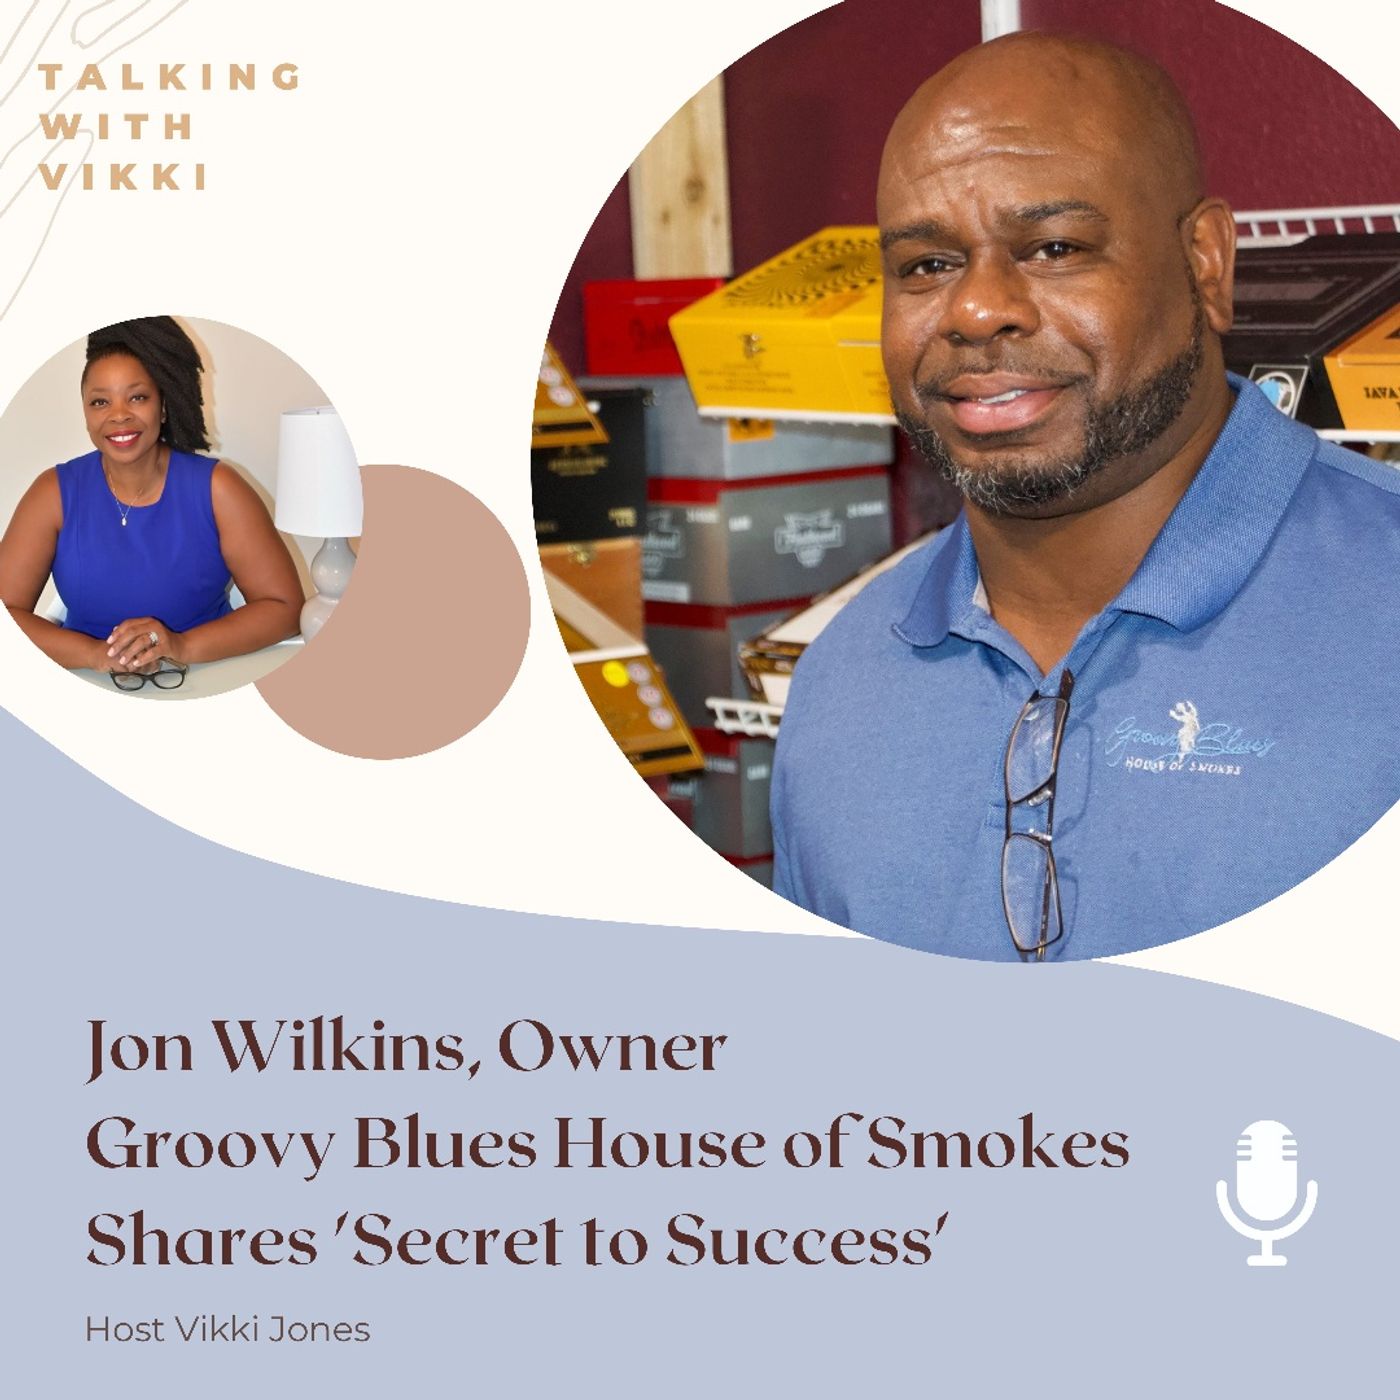 Jon Wilkins, Owner of Groovy Blues House of Smokes Shares Backstory and Secrets to Small Business  Success